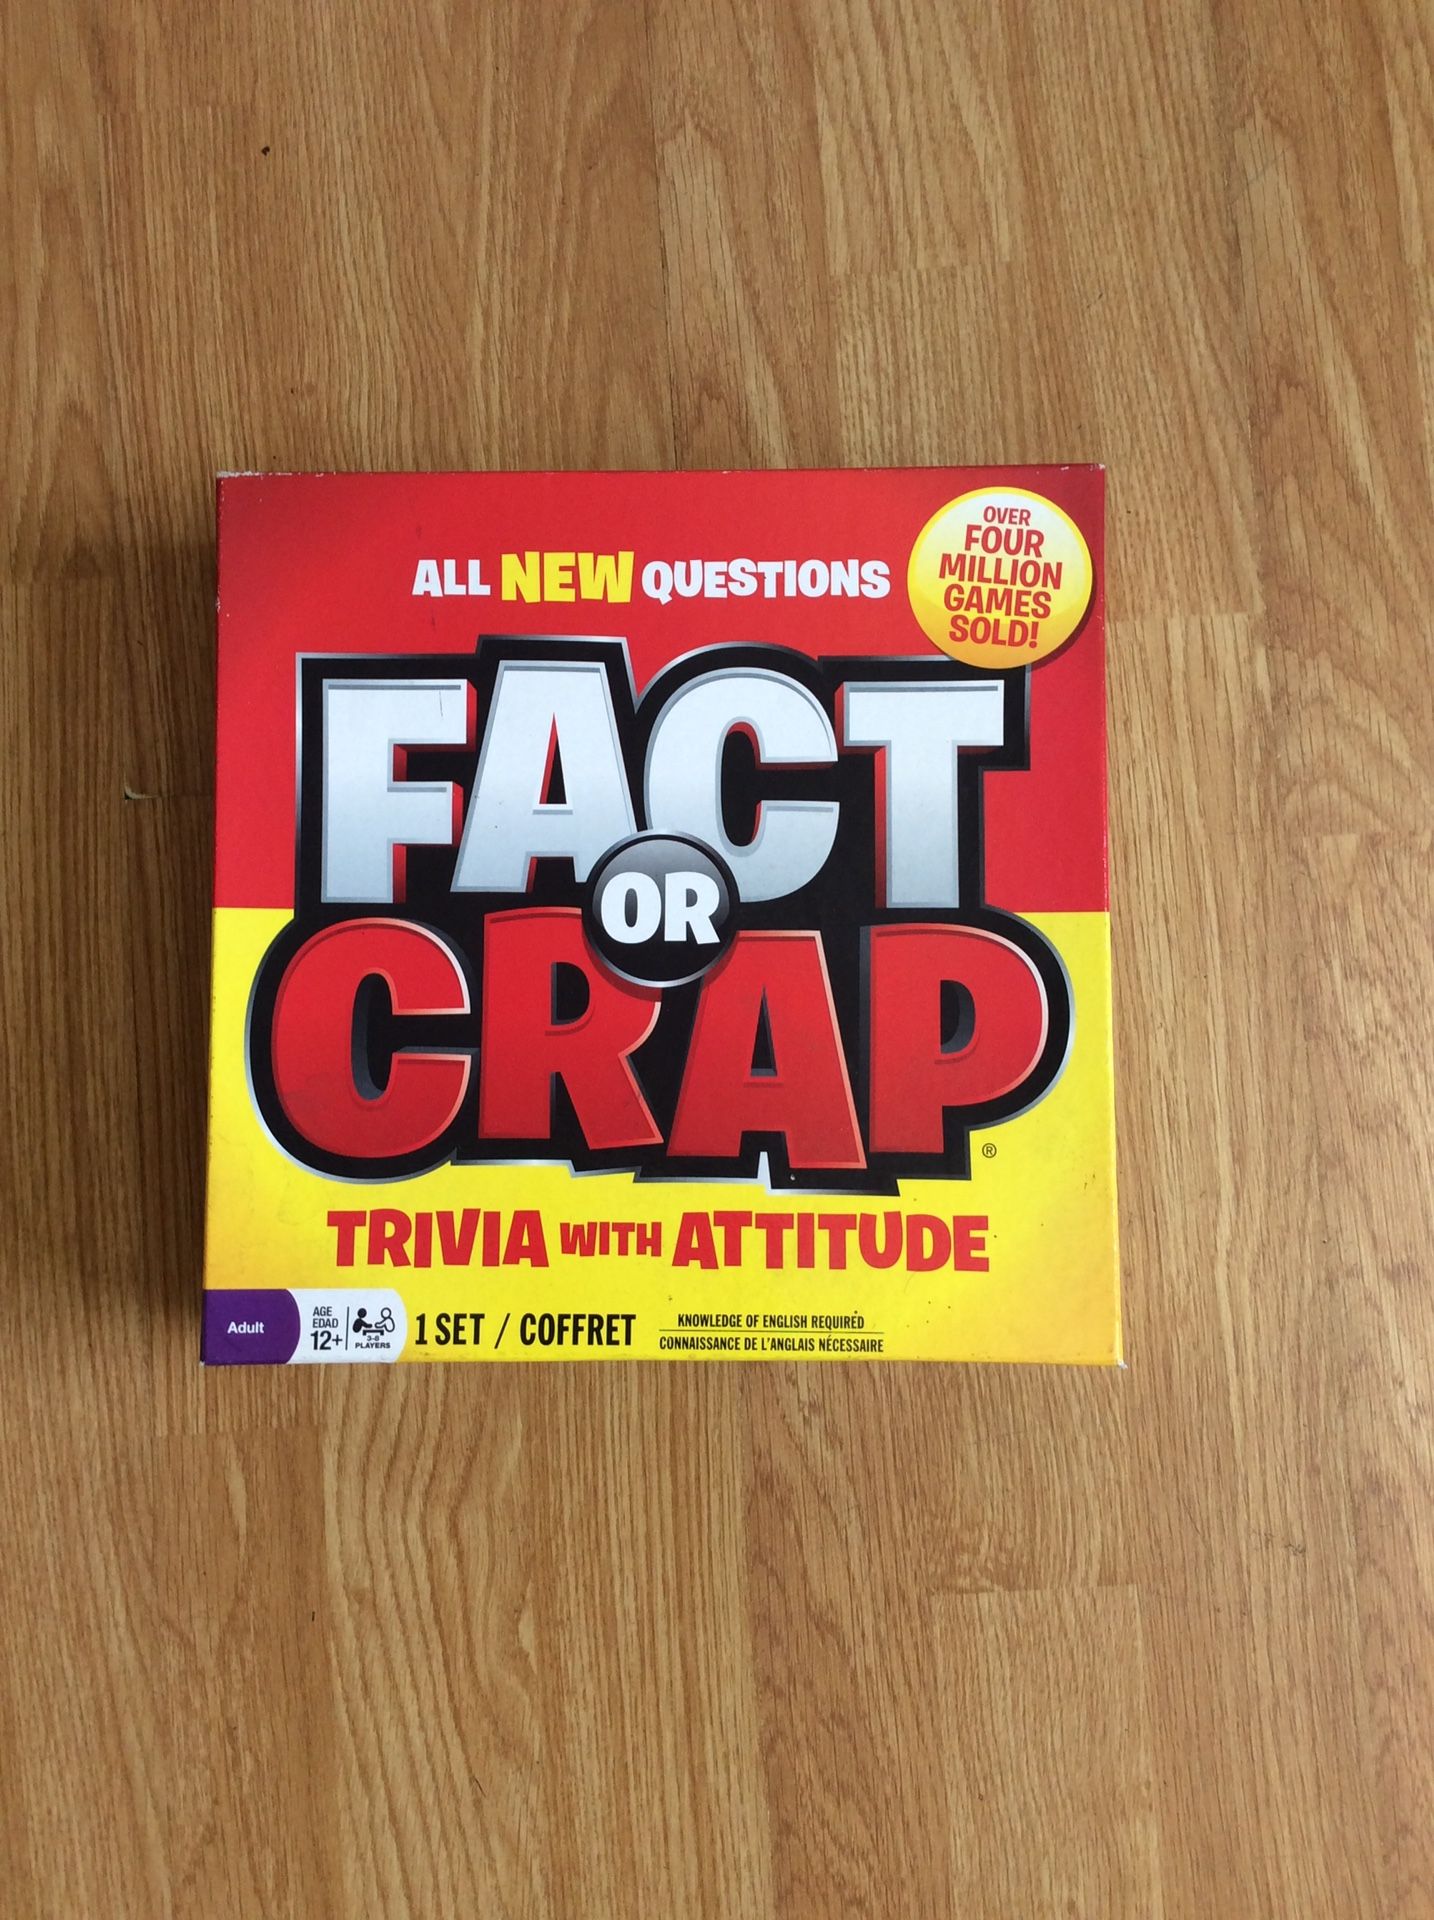 FACT OR CRAP/ ALL NEW BOARD GAME/ OVER 4 MILLION COPIES SOLD/ BOARD GAME/ QUARANTINE